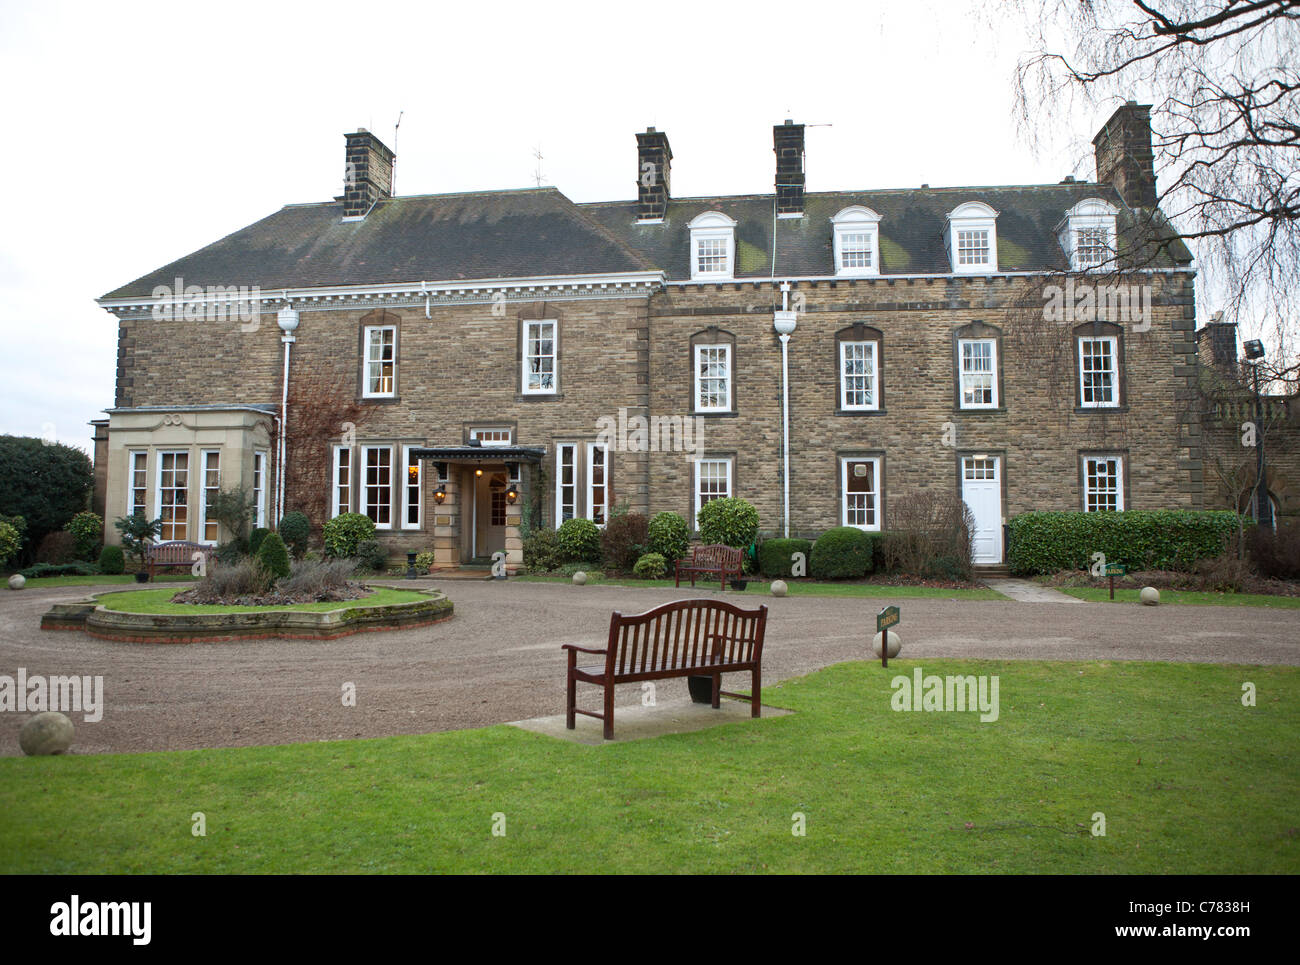 Pictured is Judges Hotel and Restaurant in North Yorkshire. Photo by Fabio De Paola Stock Photo